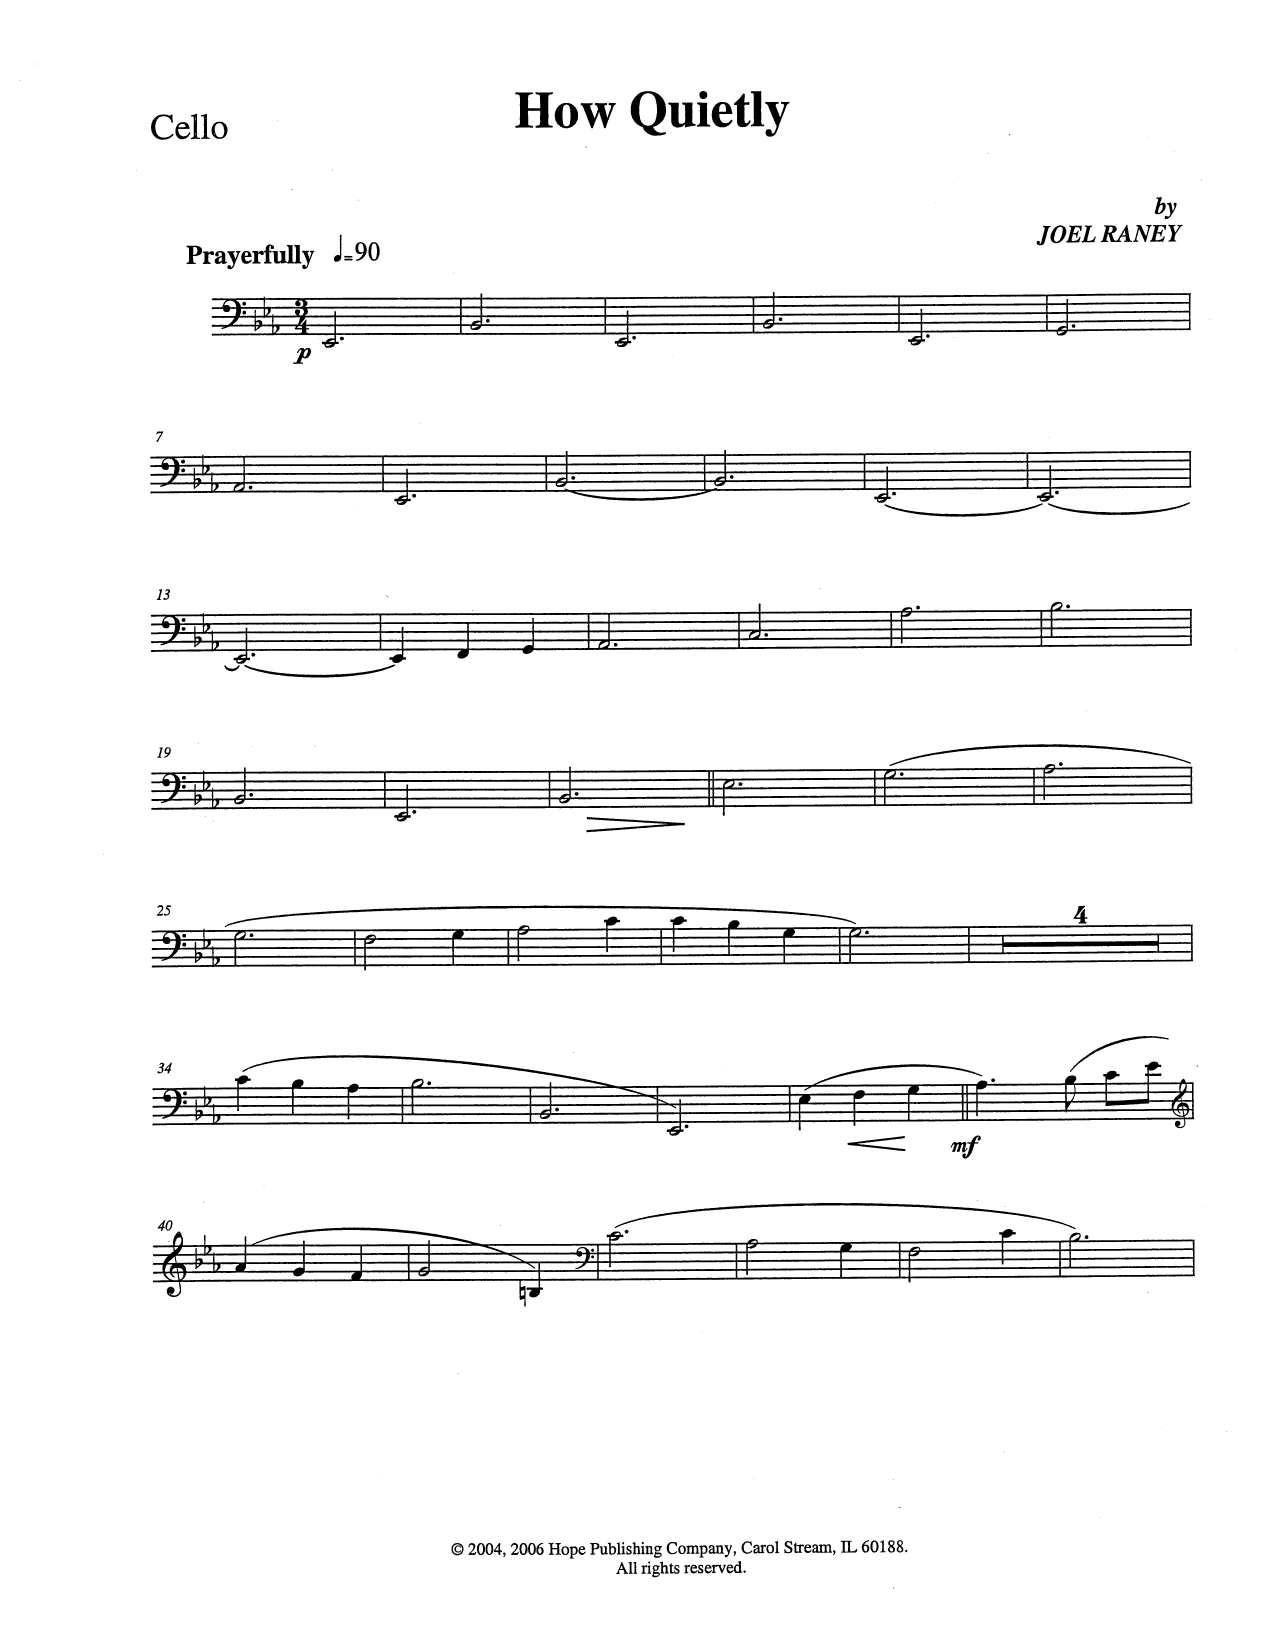 Download Joel Raney How Quietly - Cello Sheet Music